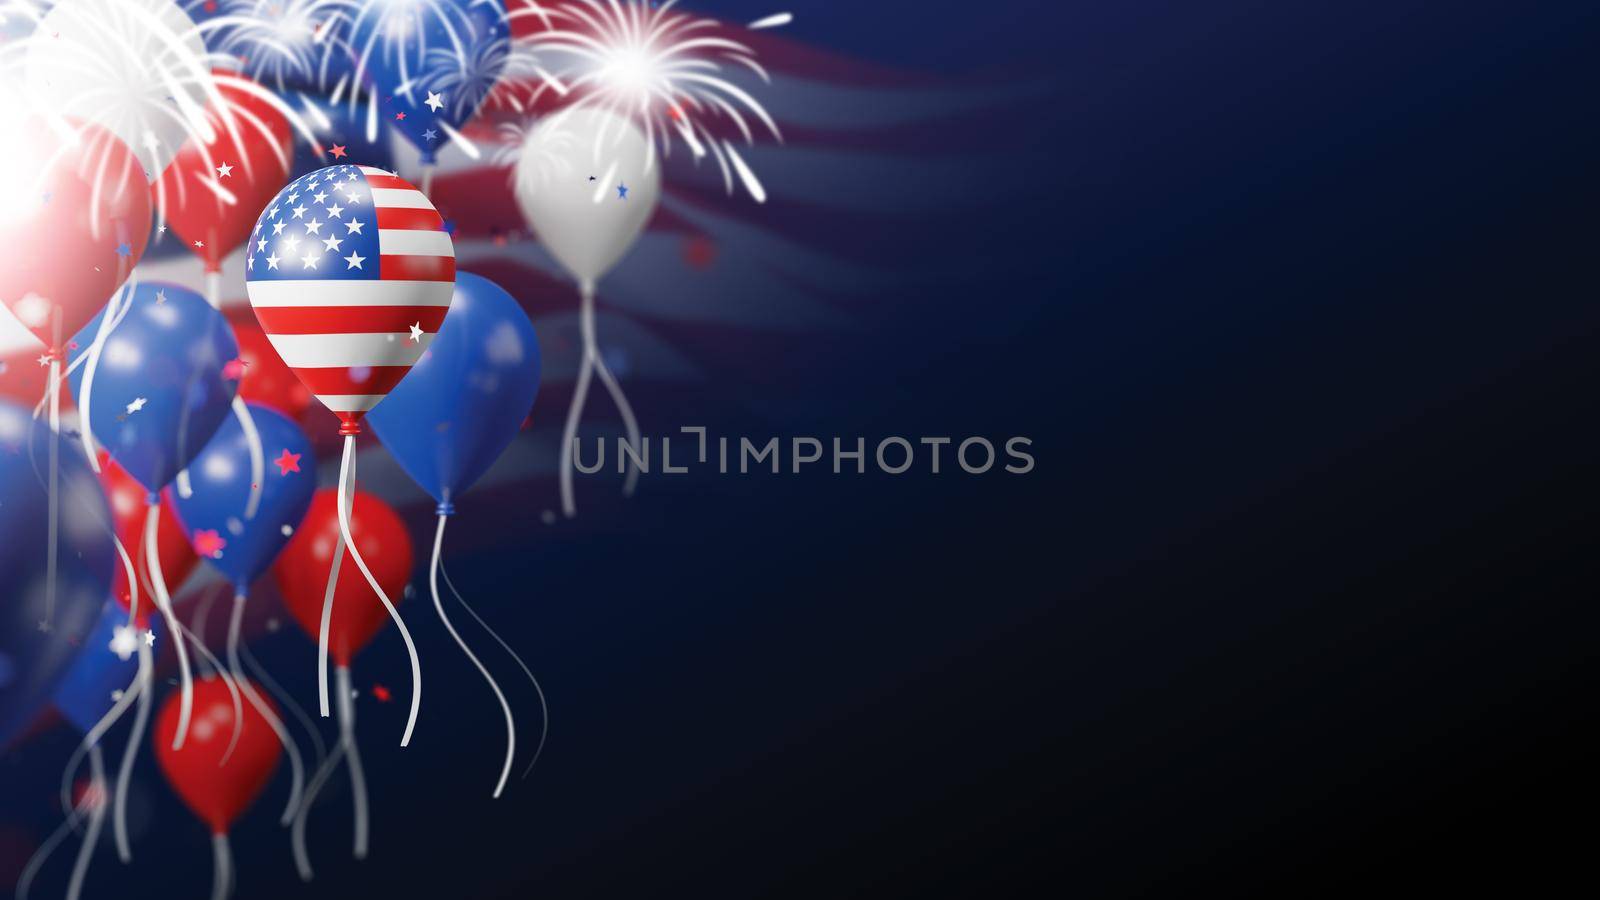 4th of july usa independence day banner design of balloon with american flag 3D render